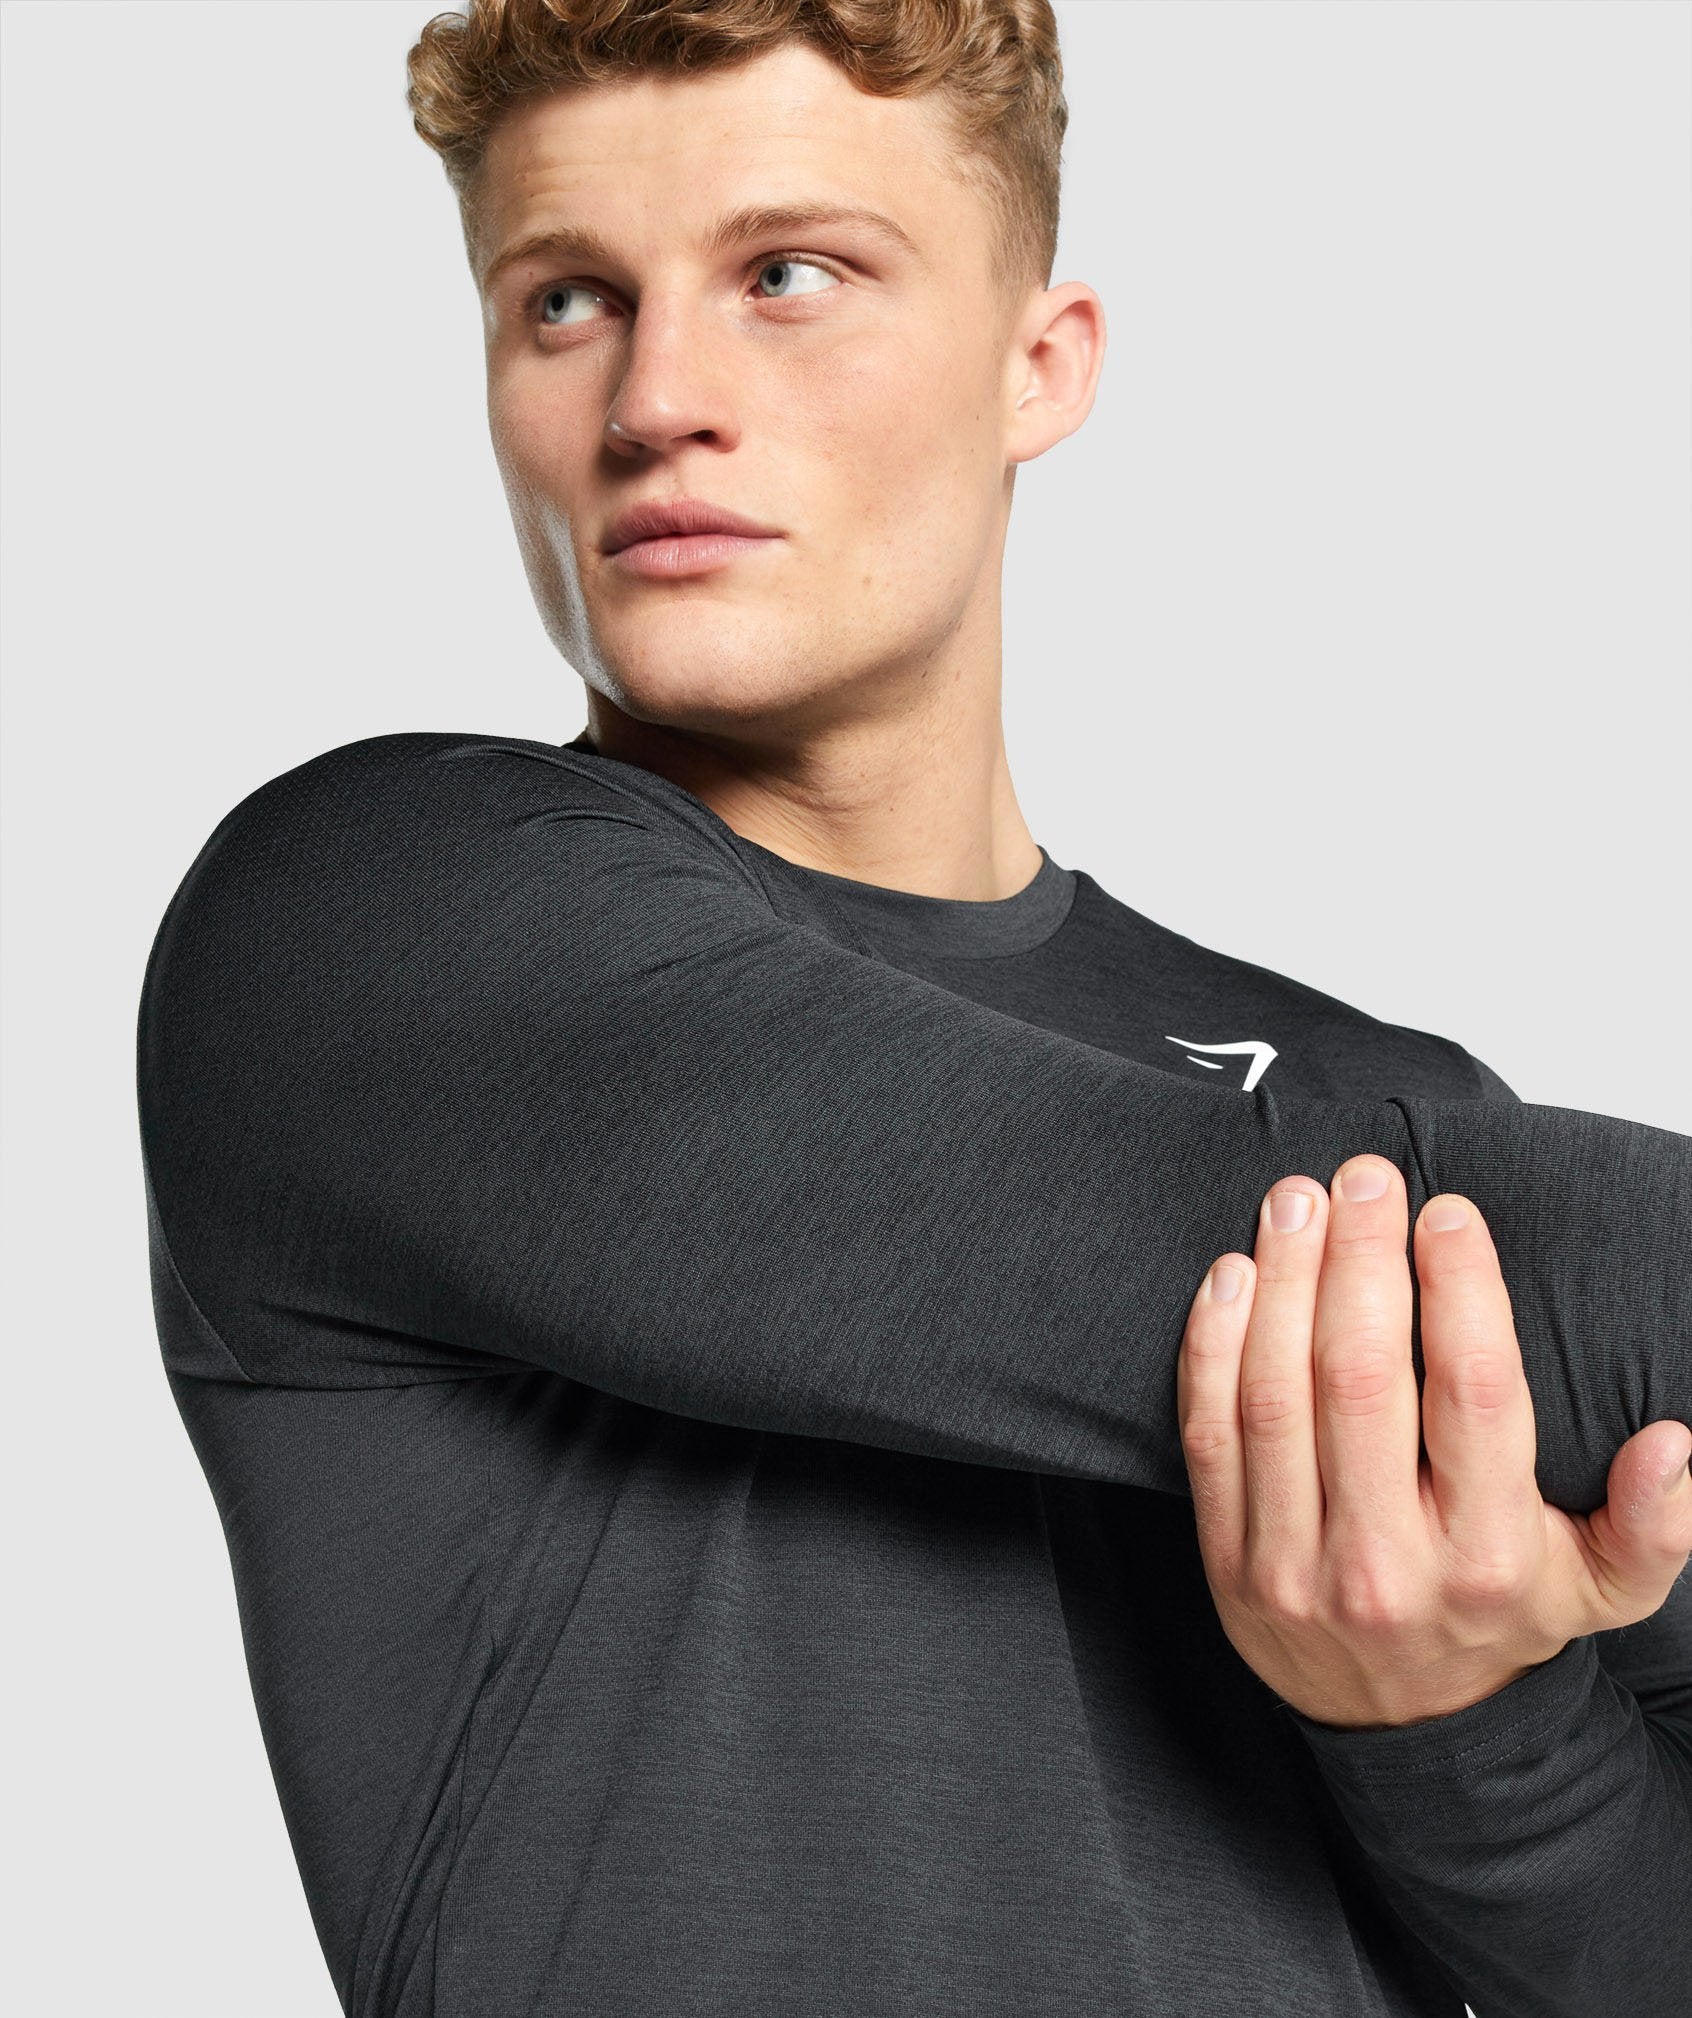 Arrival Marl Long Sleeve T-Shirt in Black Marl - view 6